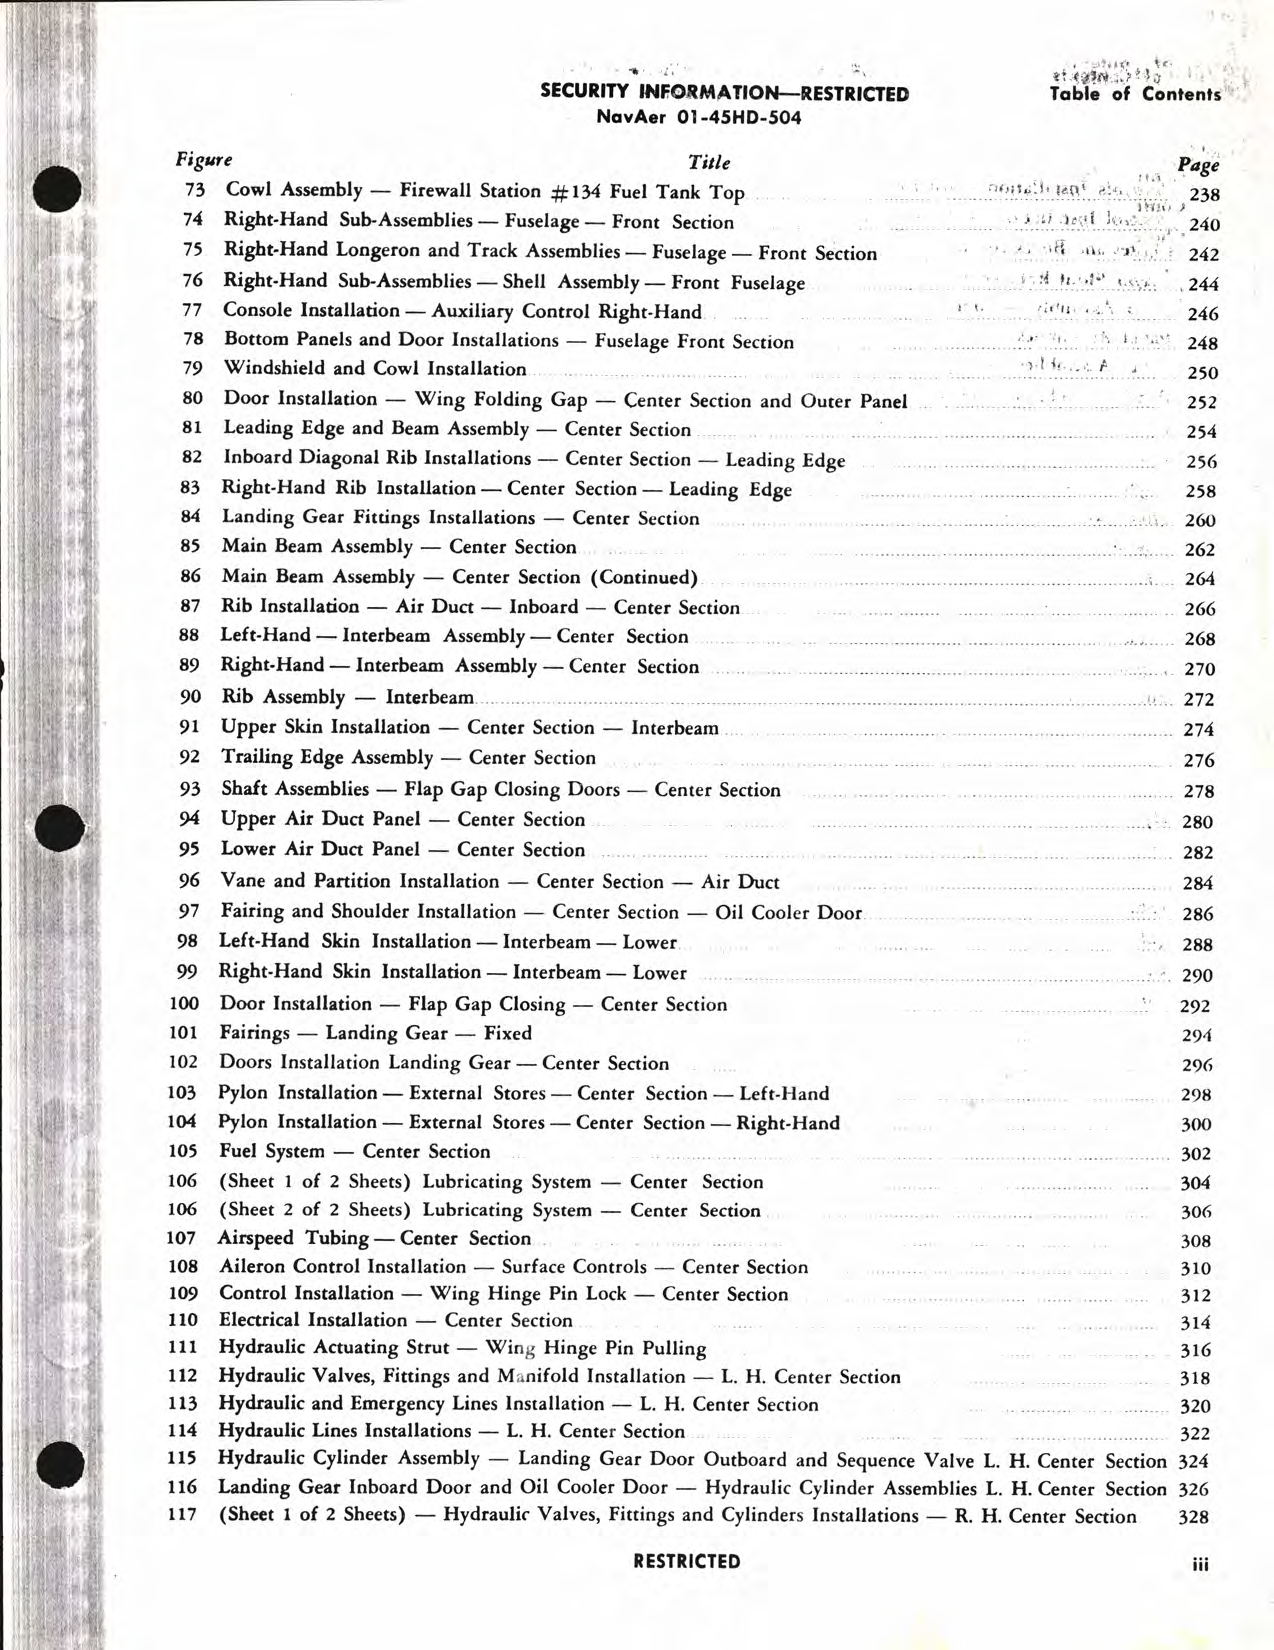 Sample page 5 from AirCorps Library document: Illustrated Maintenance Parts List for F4U-5, -5N, -5NL and -5P Aircraft